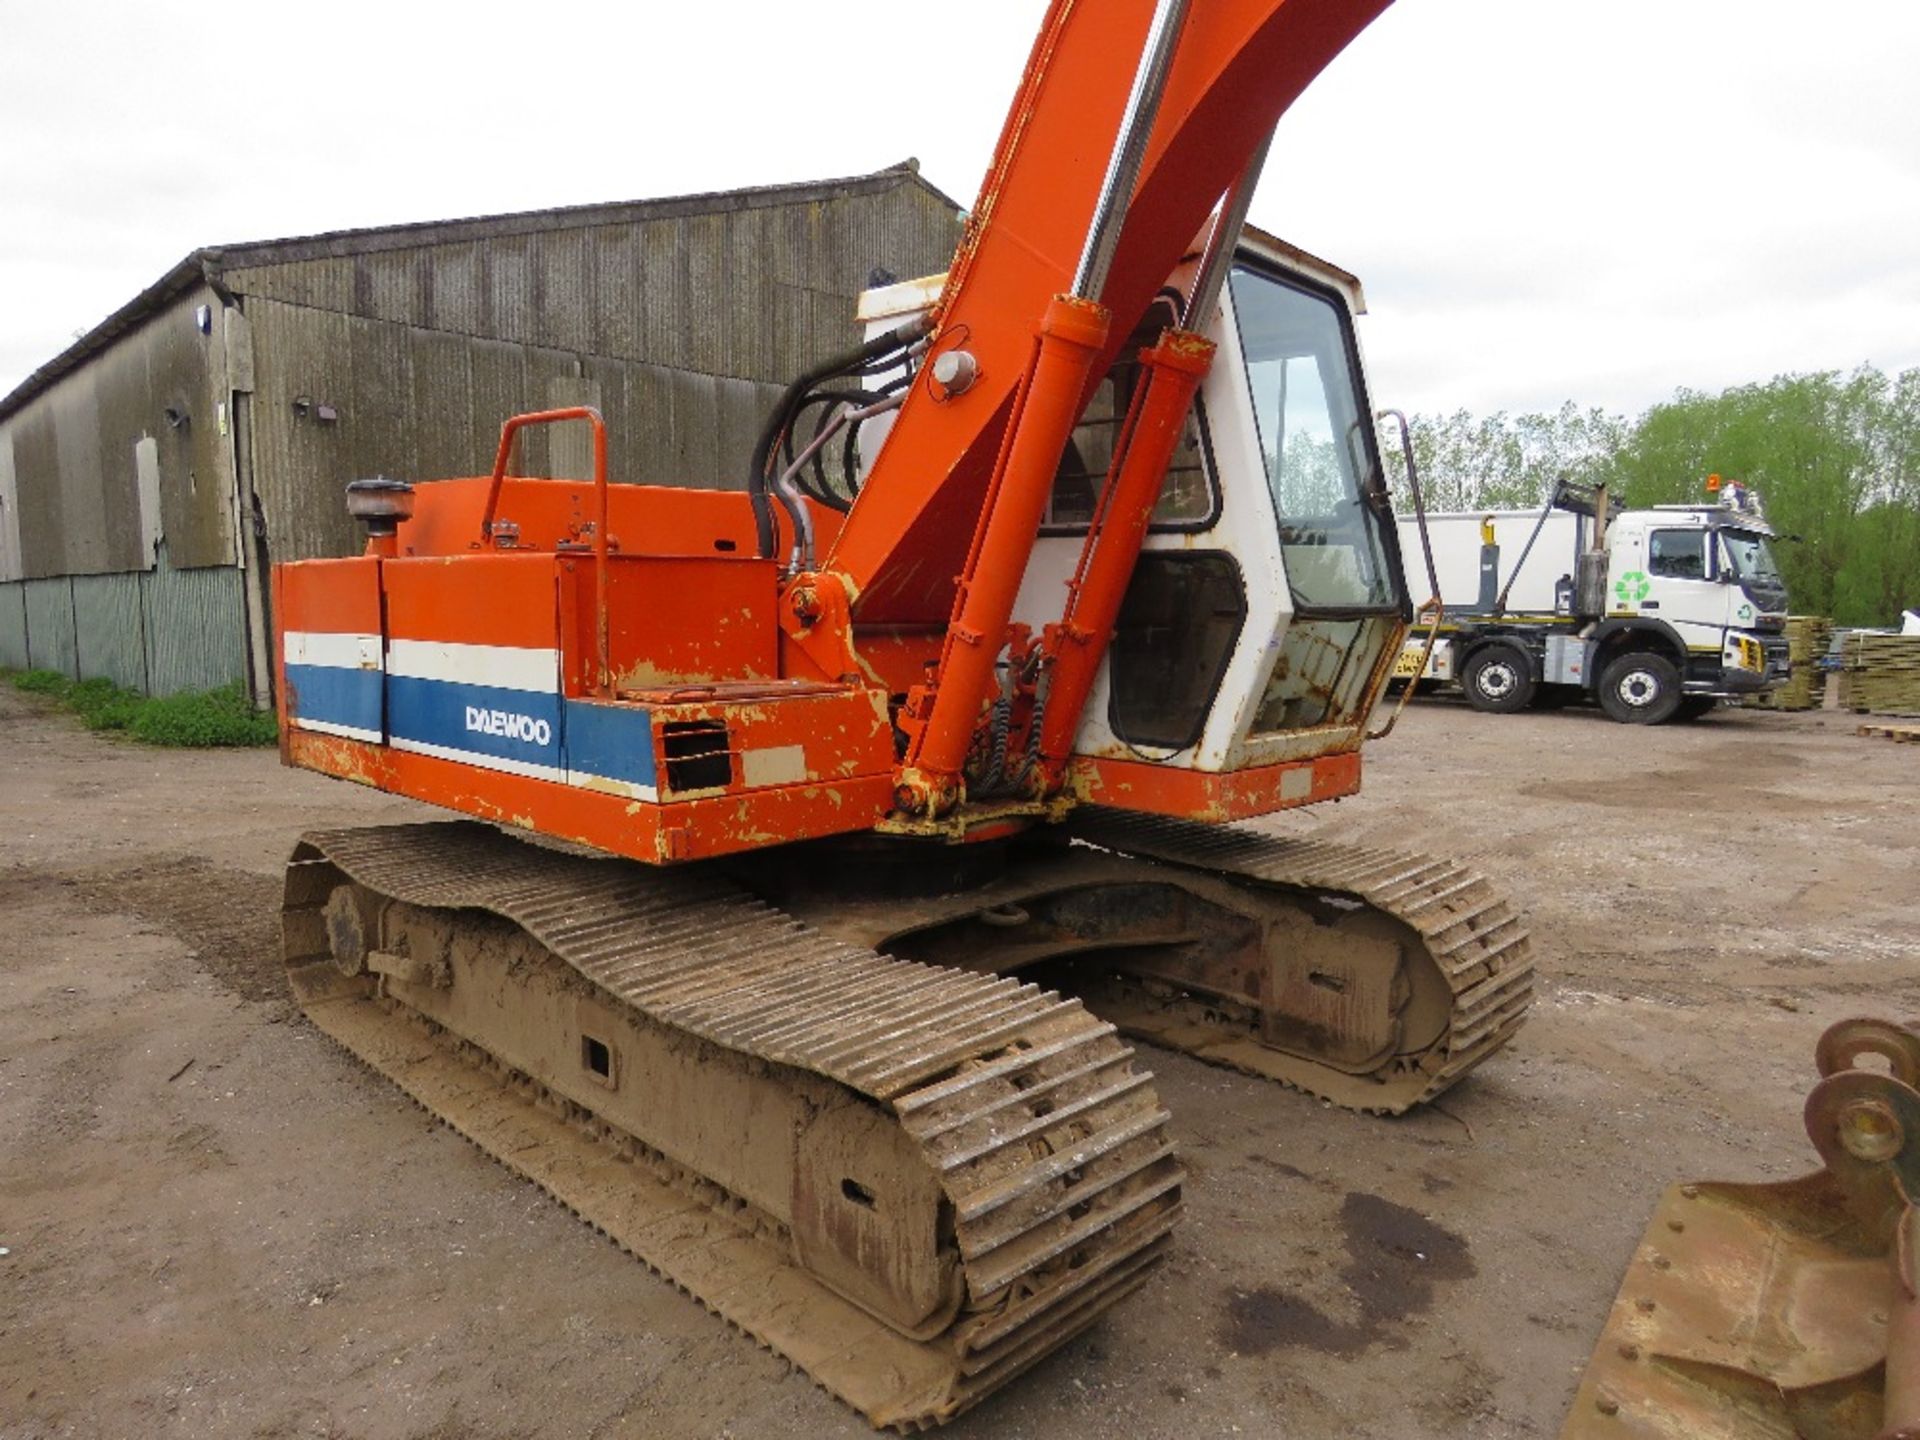 DAEWOO DH130 STEEL TRACKED EXCAVATOR, 13 TONNE RATED, SUPPLIED WITH 2 BUCKETS (6FT AND 3FT). SN:010 - Image 2 of 11